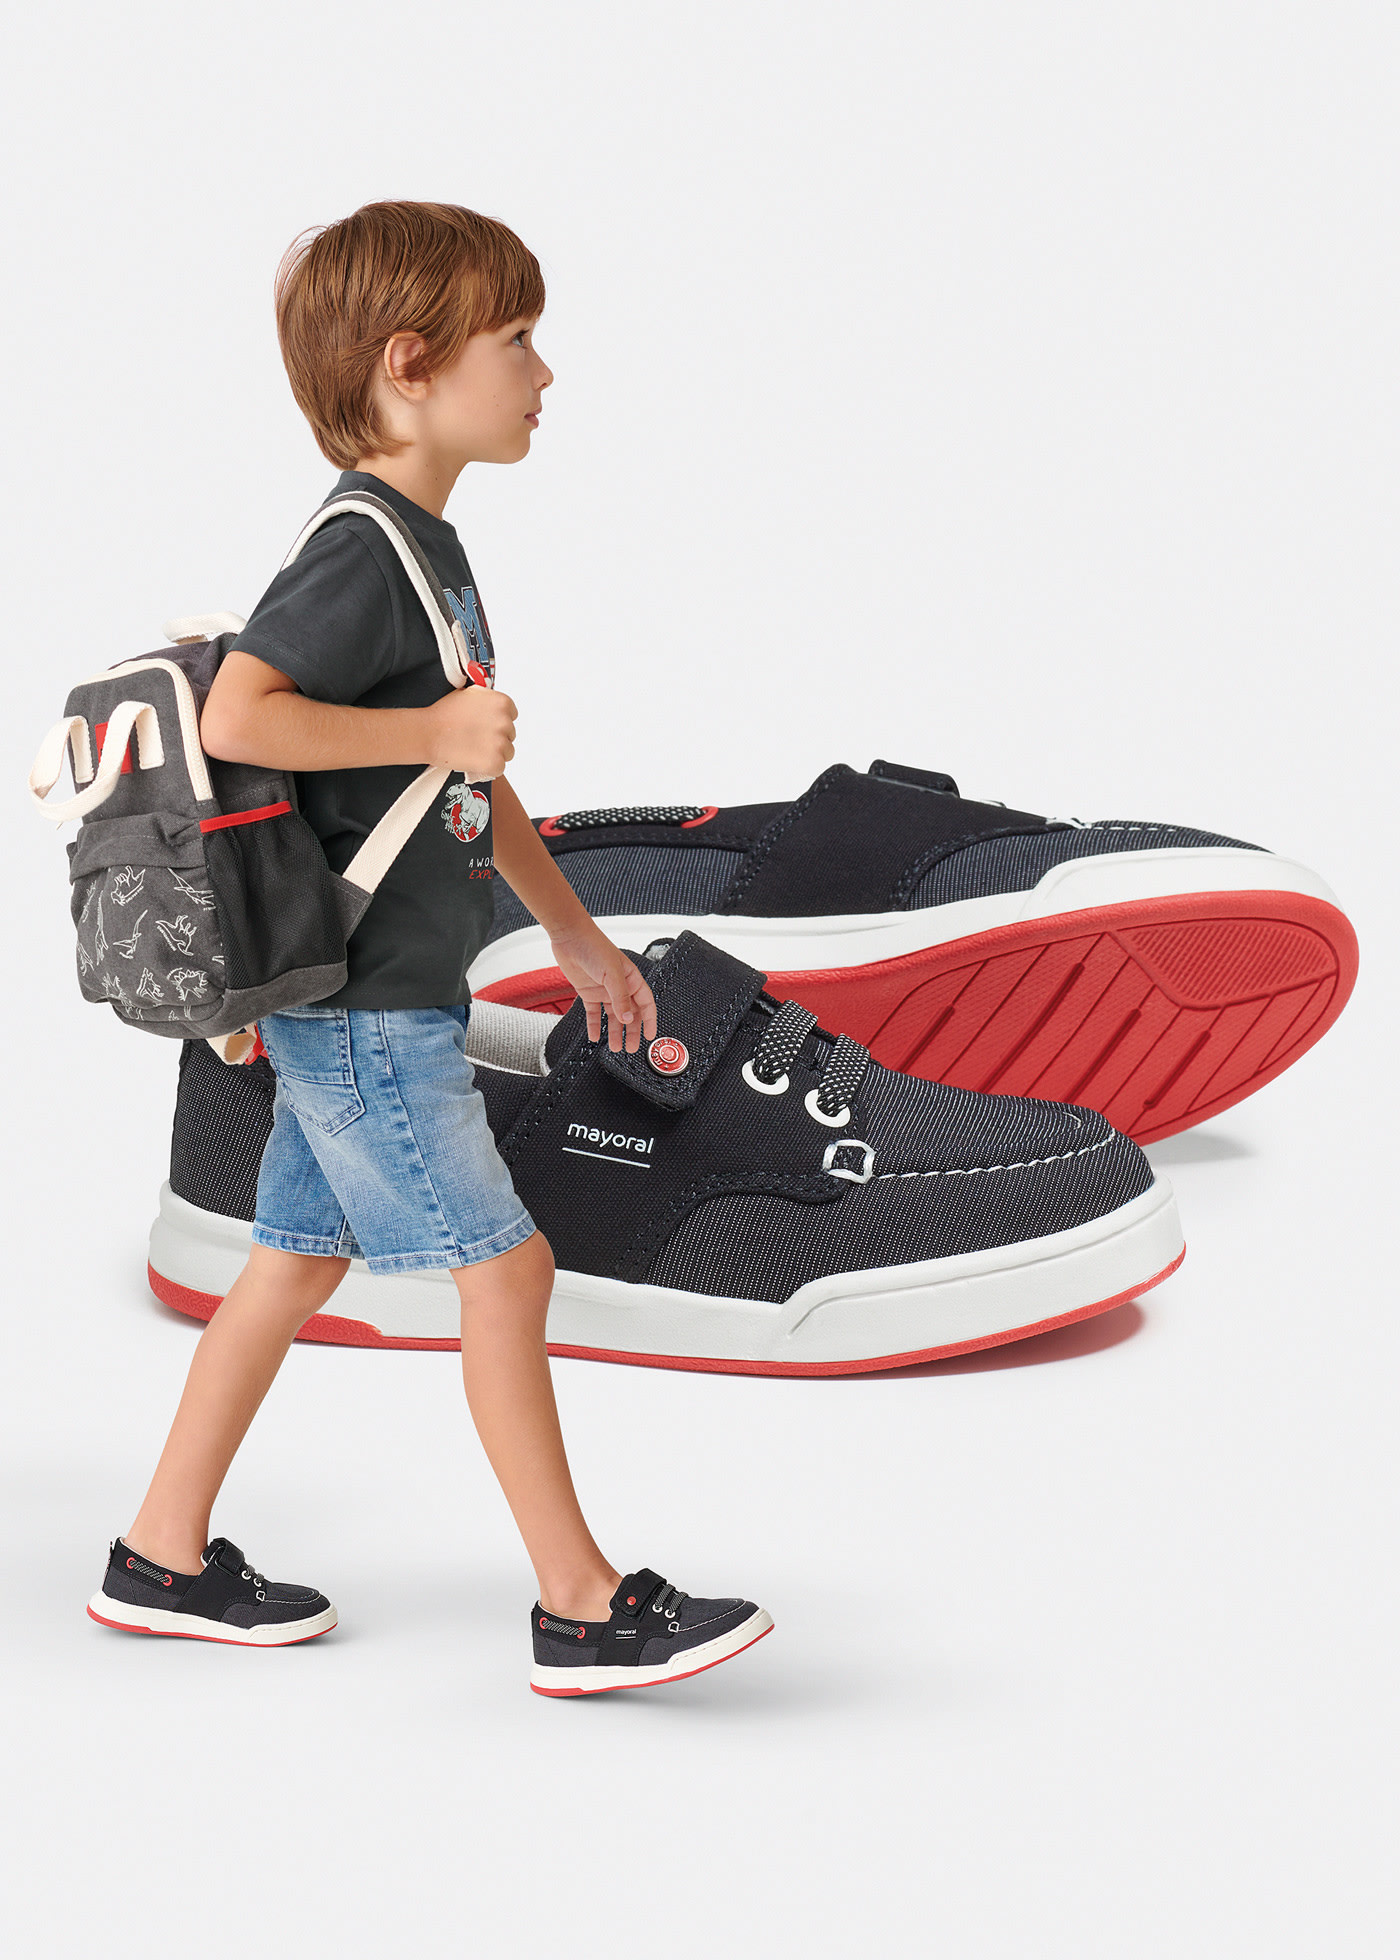 Boat shoes with velcro boy